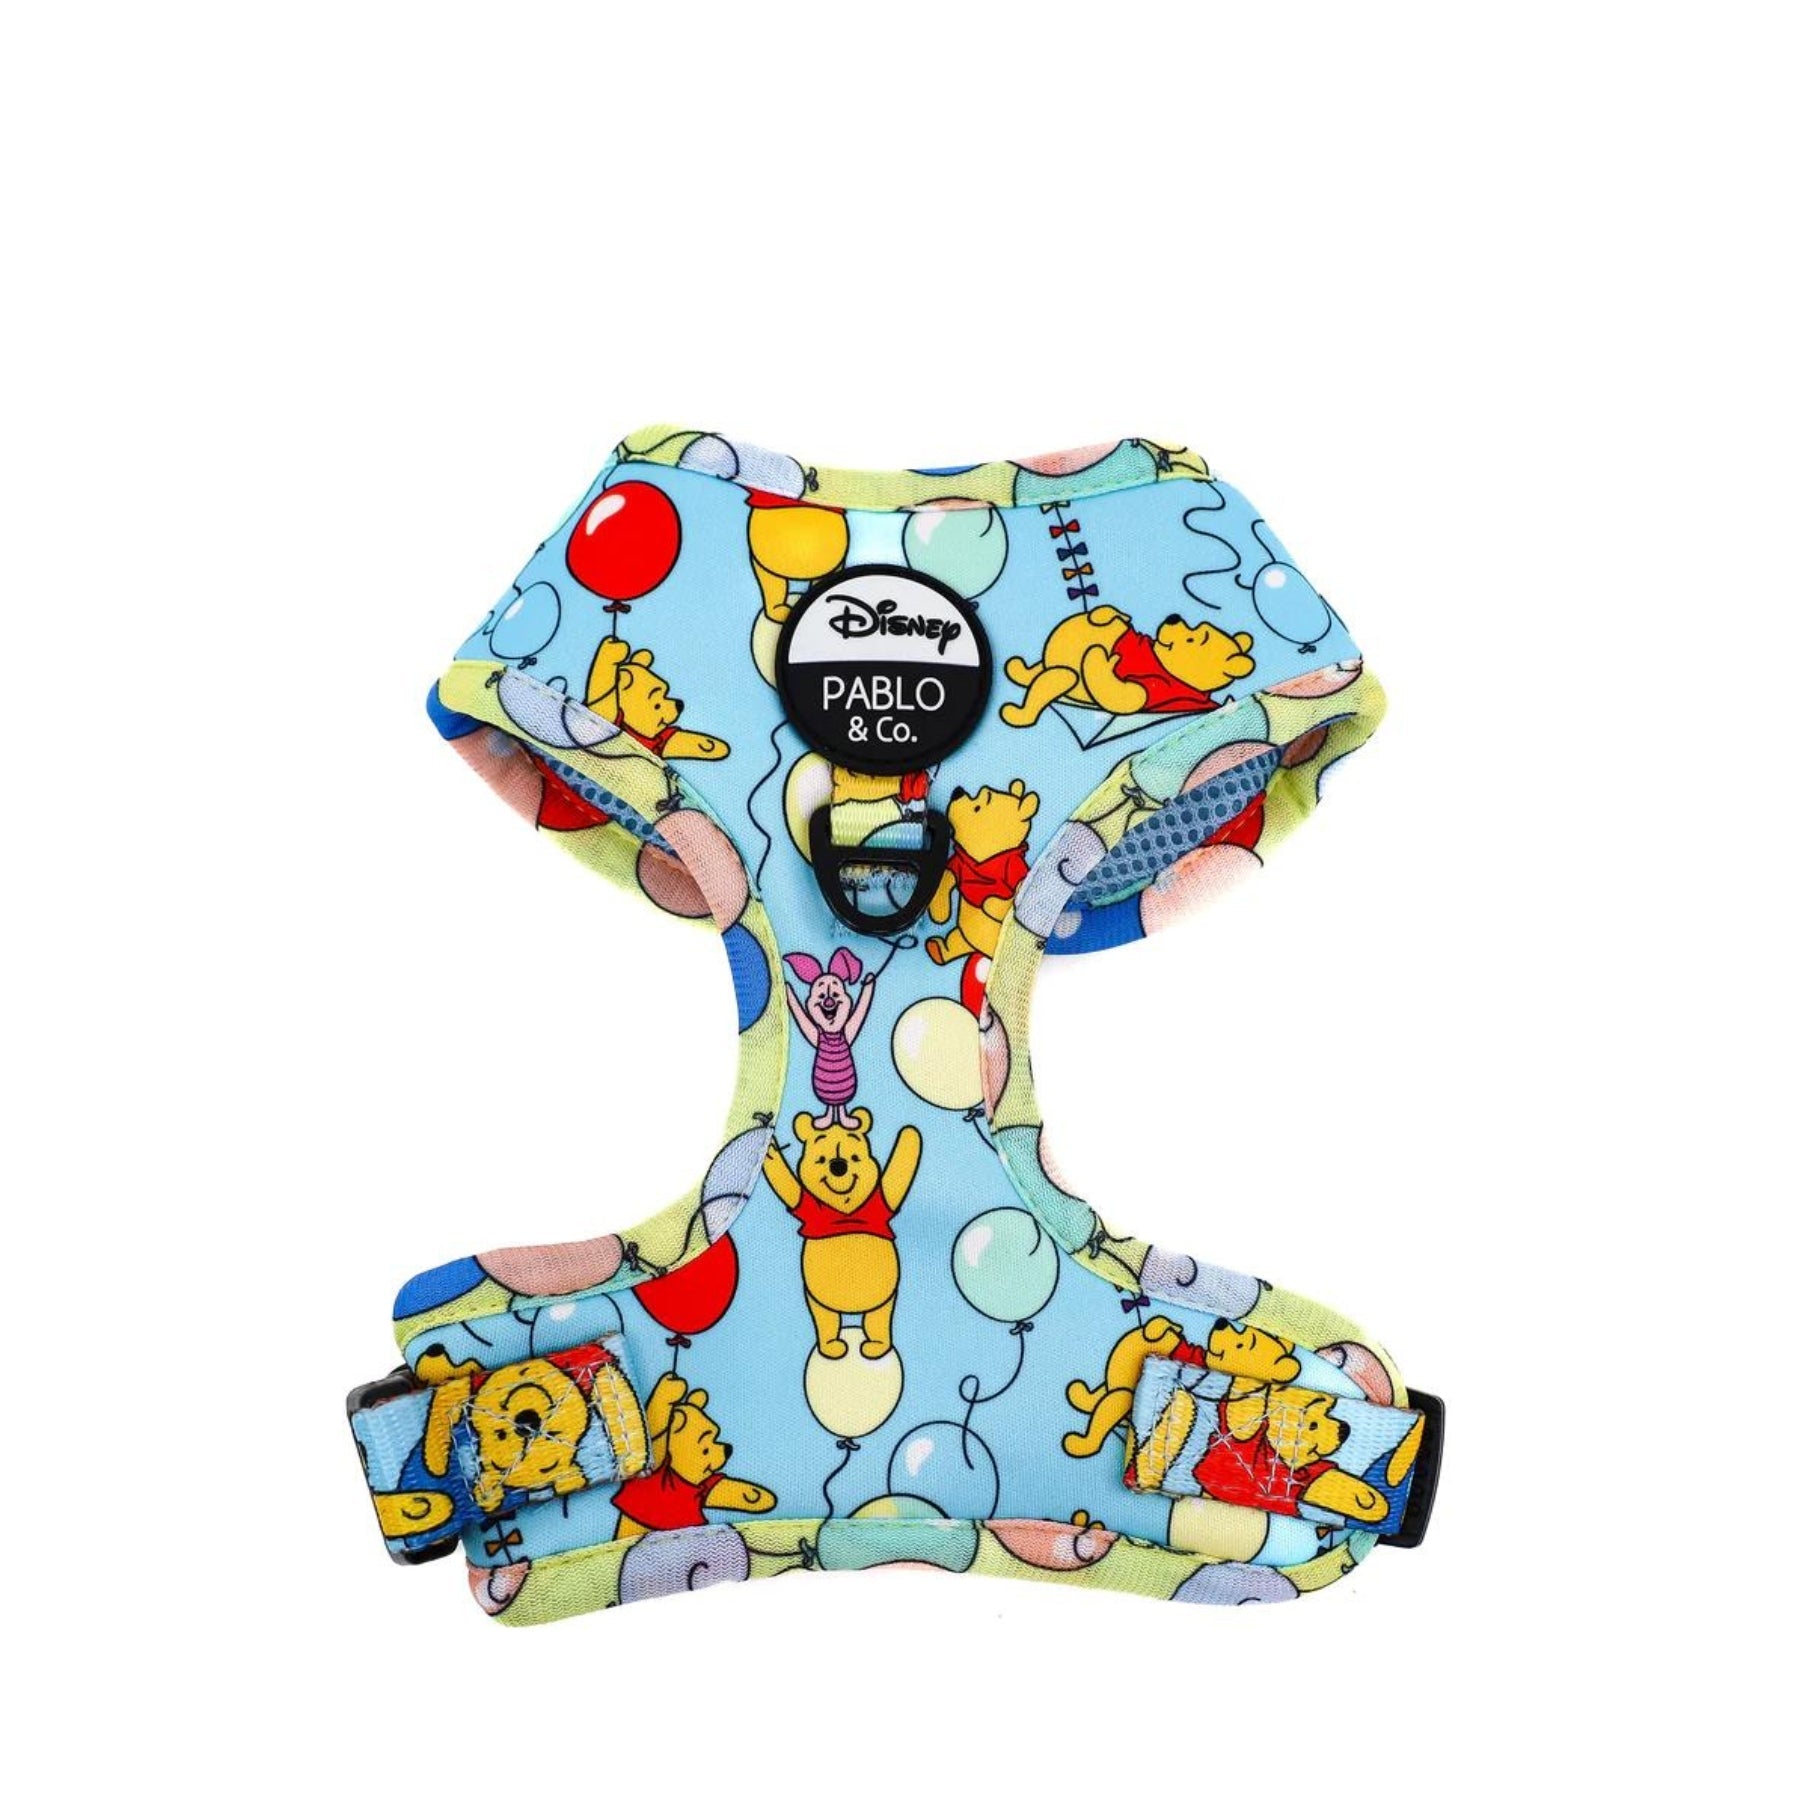 Pooh's Balloons Adjustable Harness - Pooch Luxury